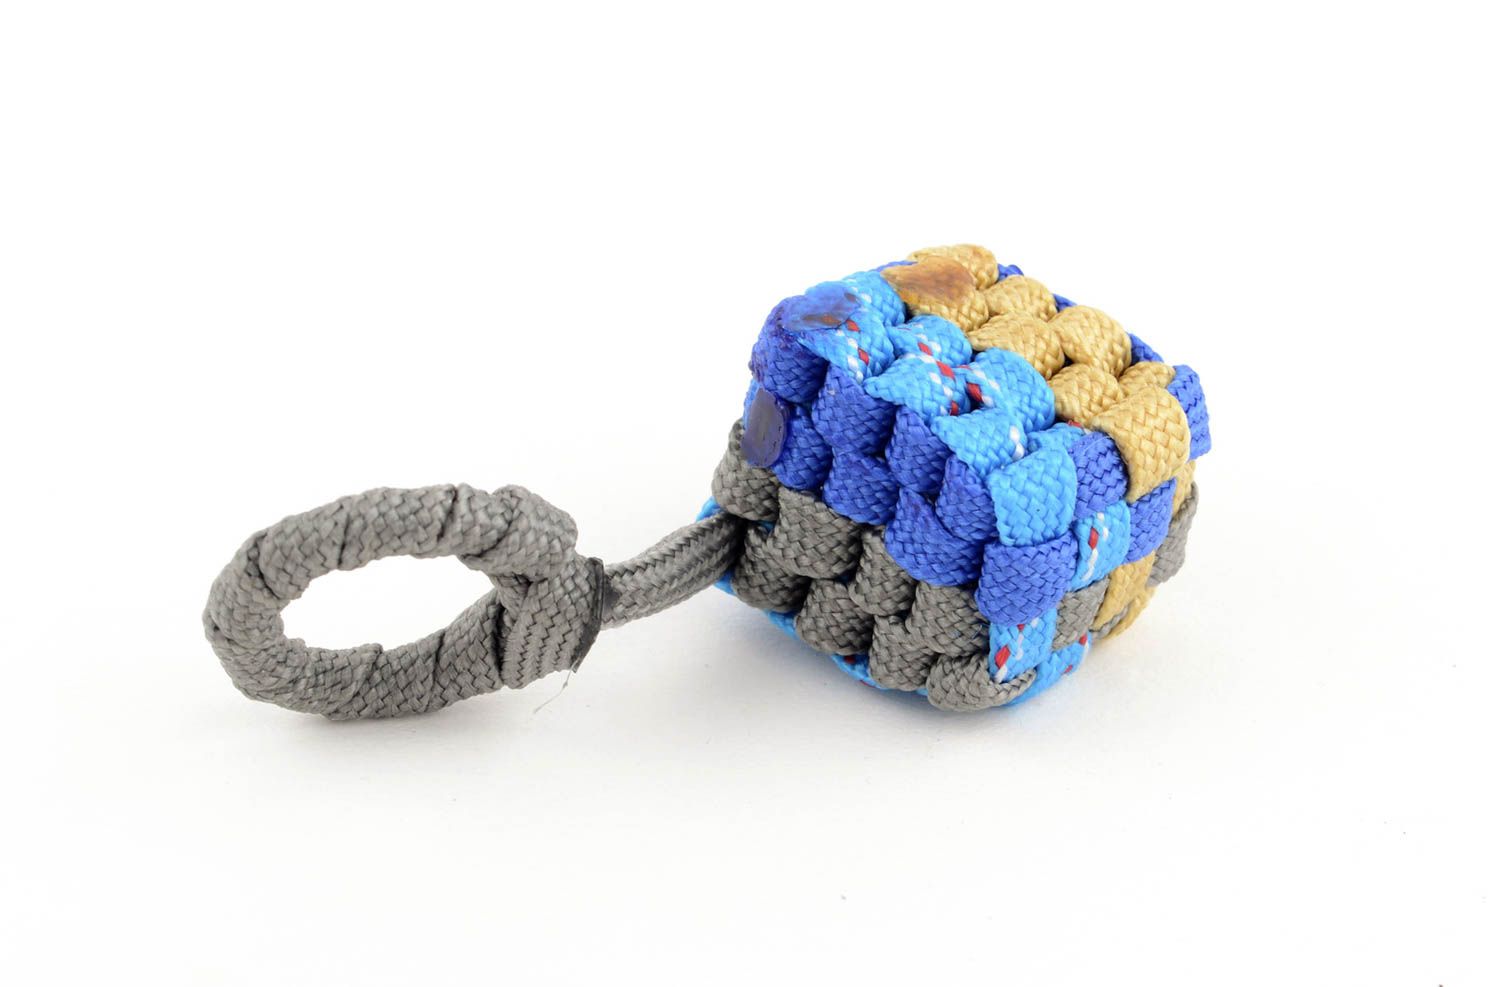 Handmade paracord key fob key accessories cool gifts hiking equipment photo 1